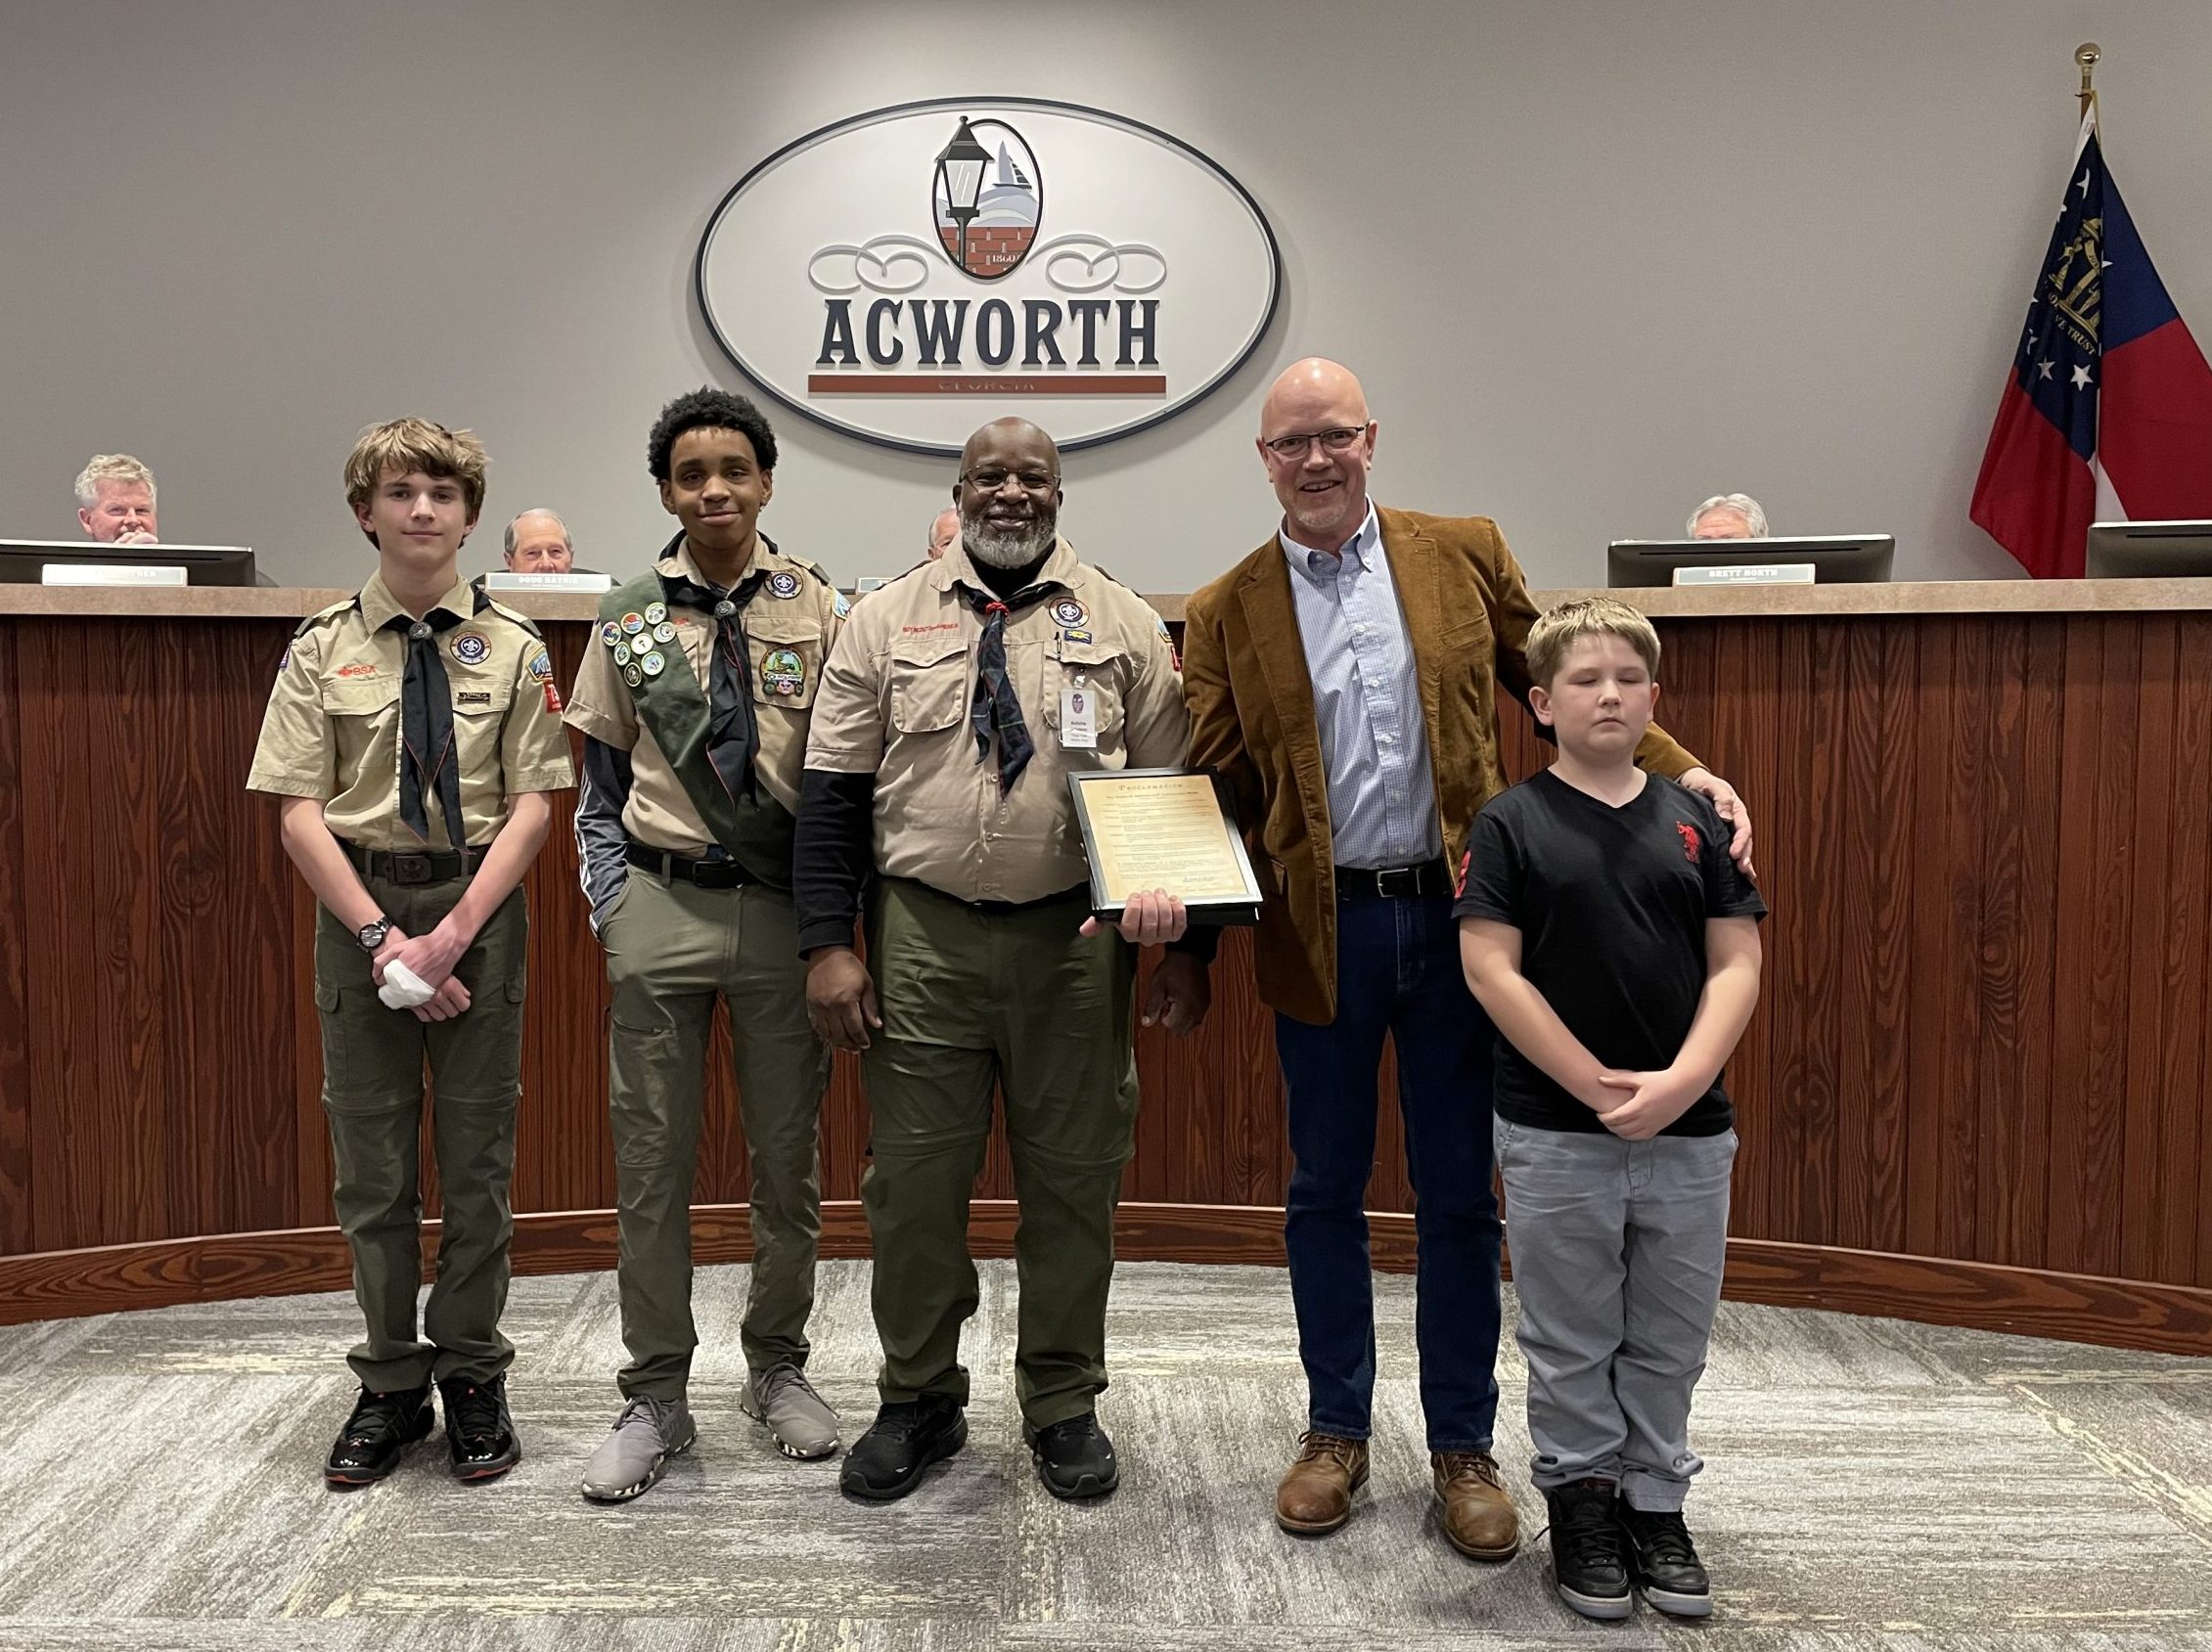 Image Alderman Toby Carmichael with Boy Scouts Presenting Proclamation